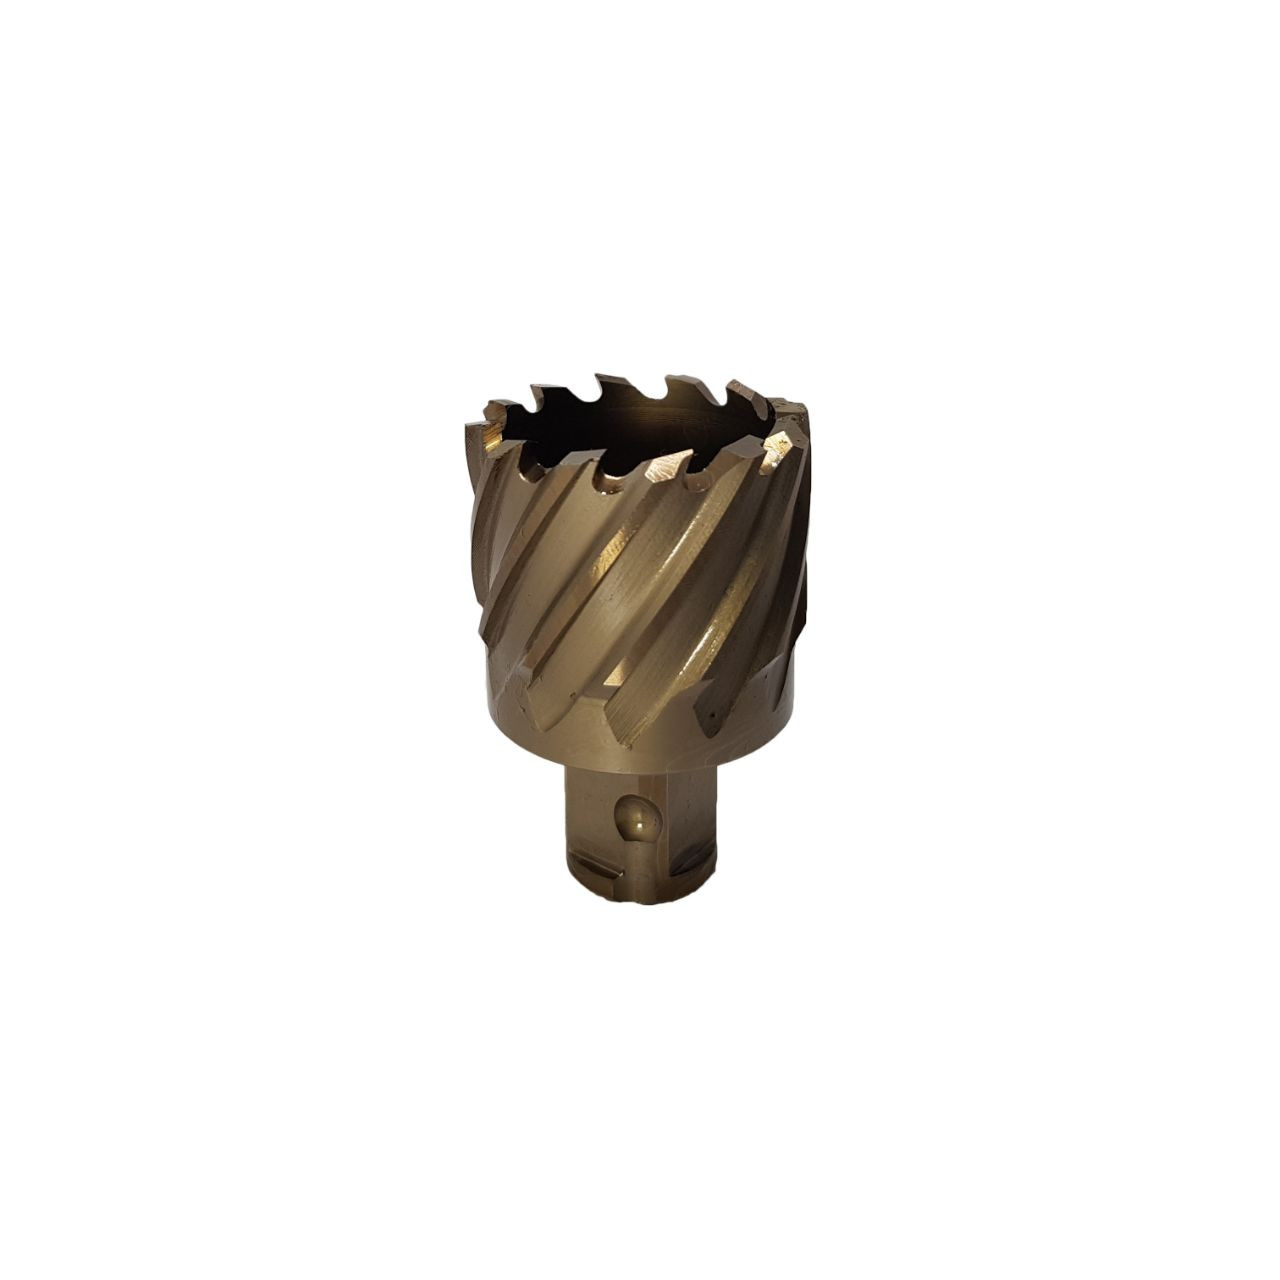 39 X 30 HSS-Co Excision Core Drill